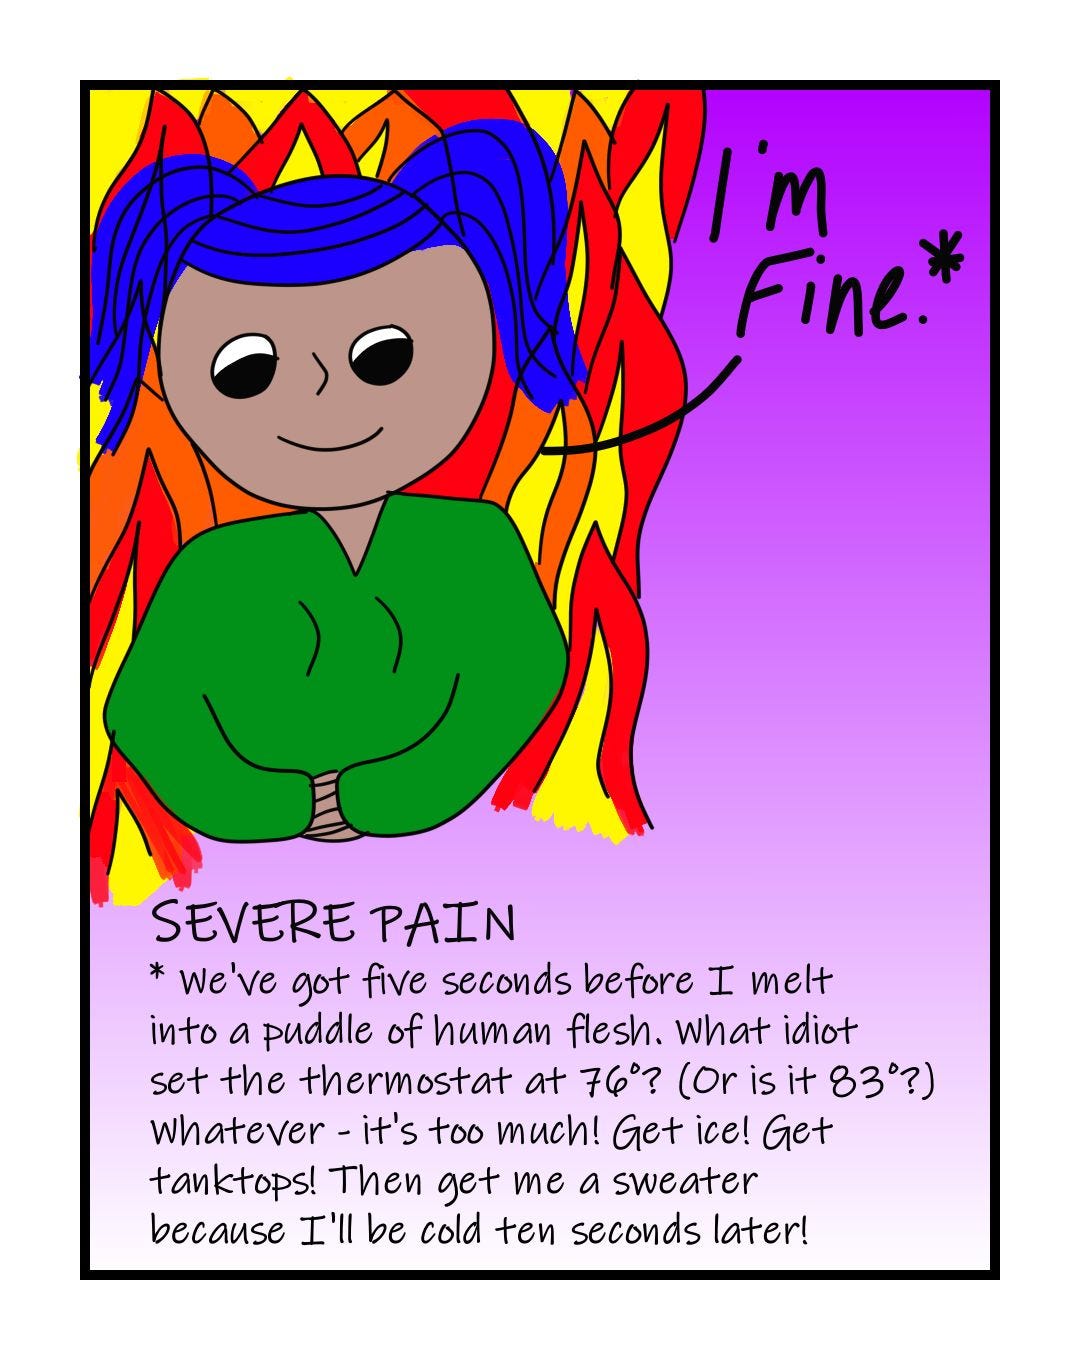 "I'm fine." SEVERE PAIN (Translation: "We've got five seconds before I melt into a puddle of human flesh. What idiot set the thermostat at 76 degrees? (Or is it 83 degrees?) Whatever - it's too much! Get ice! Get tanktops! Then get me a sweater because I'll be cold ten seconds later!"